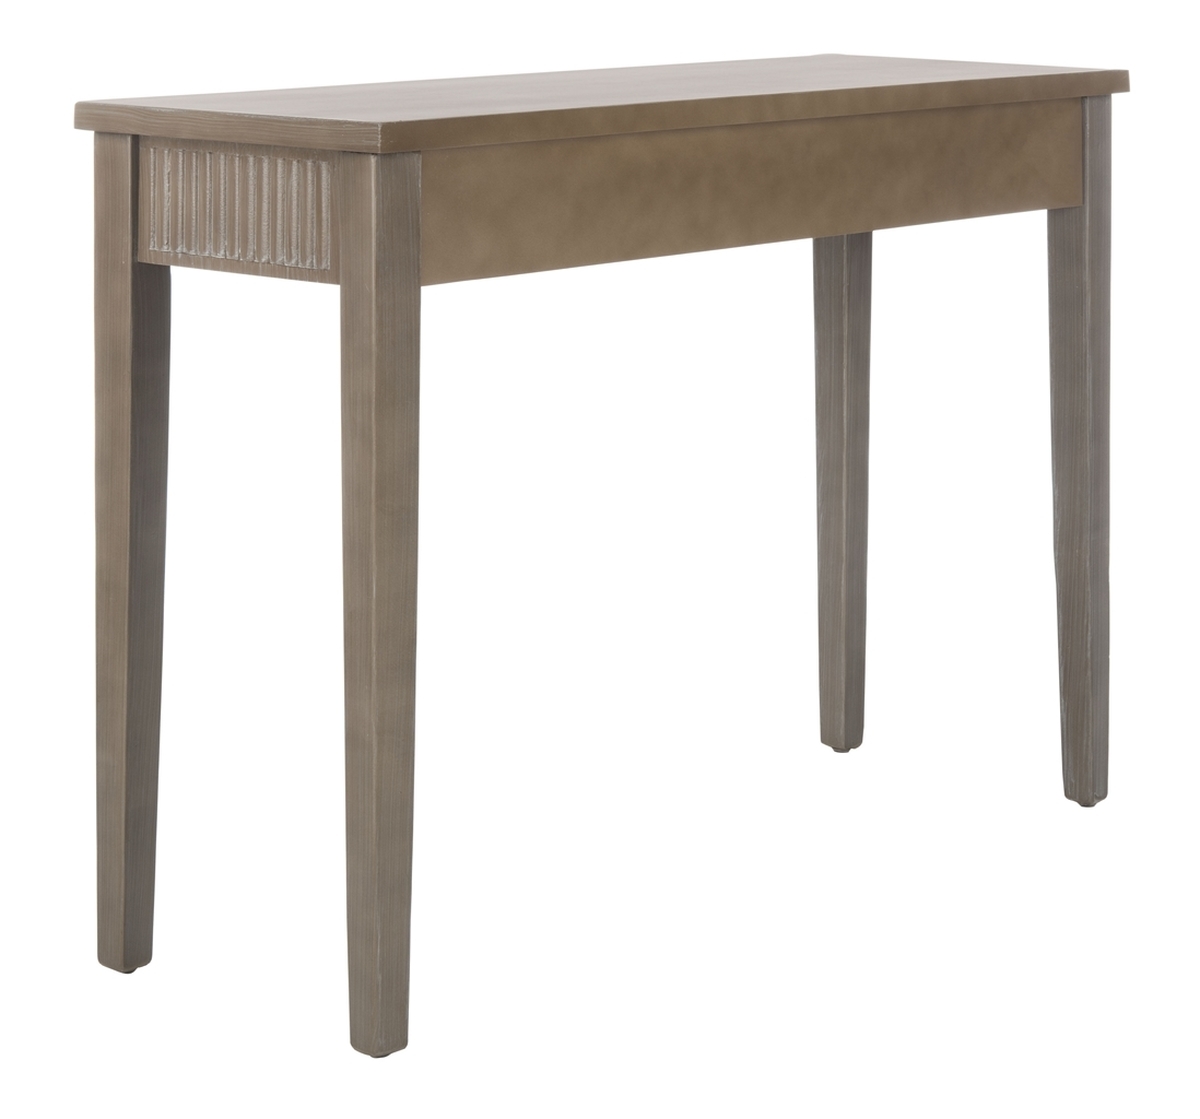 Beale Console With Storage Drawer - Grey - Safavieh - Image 5